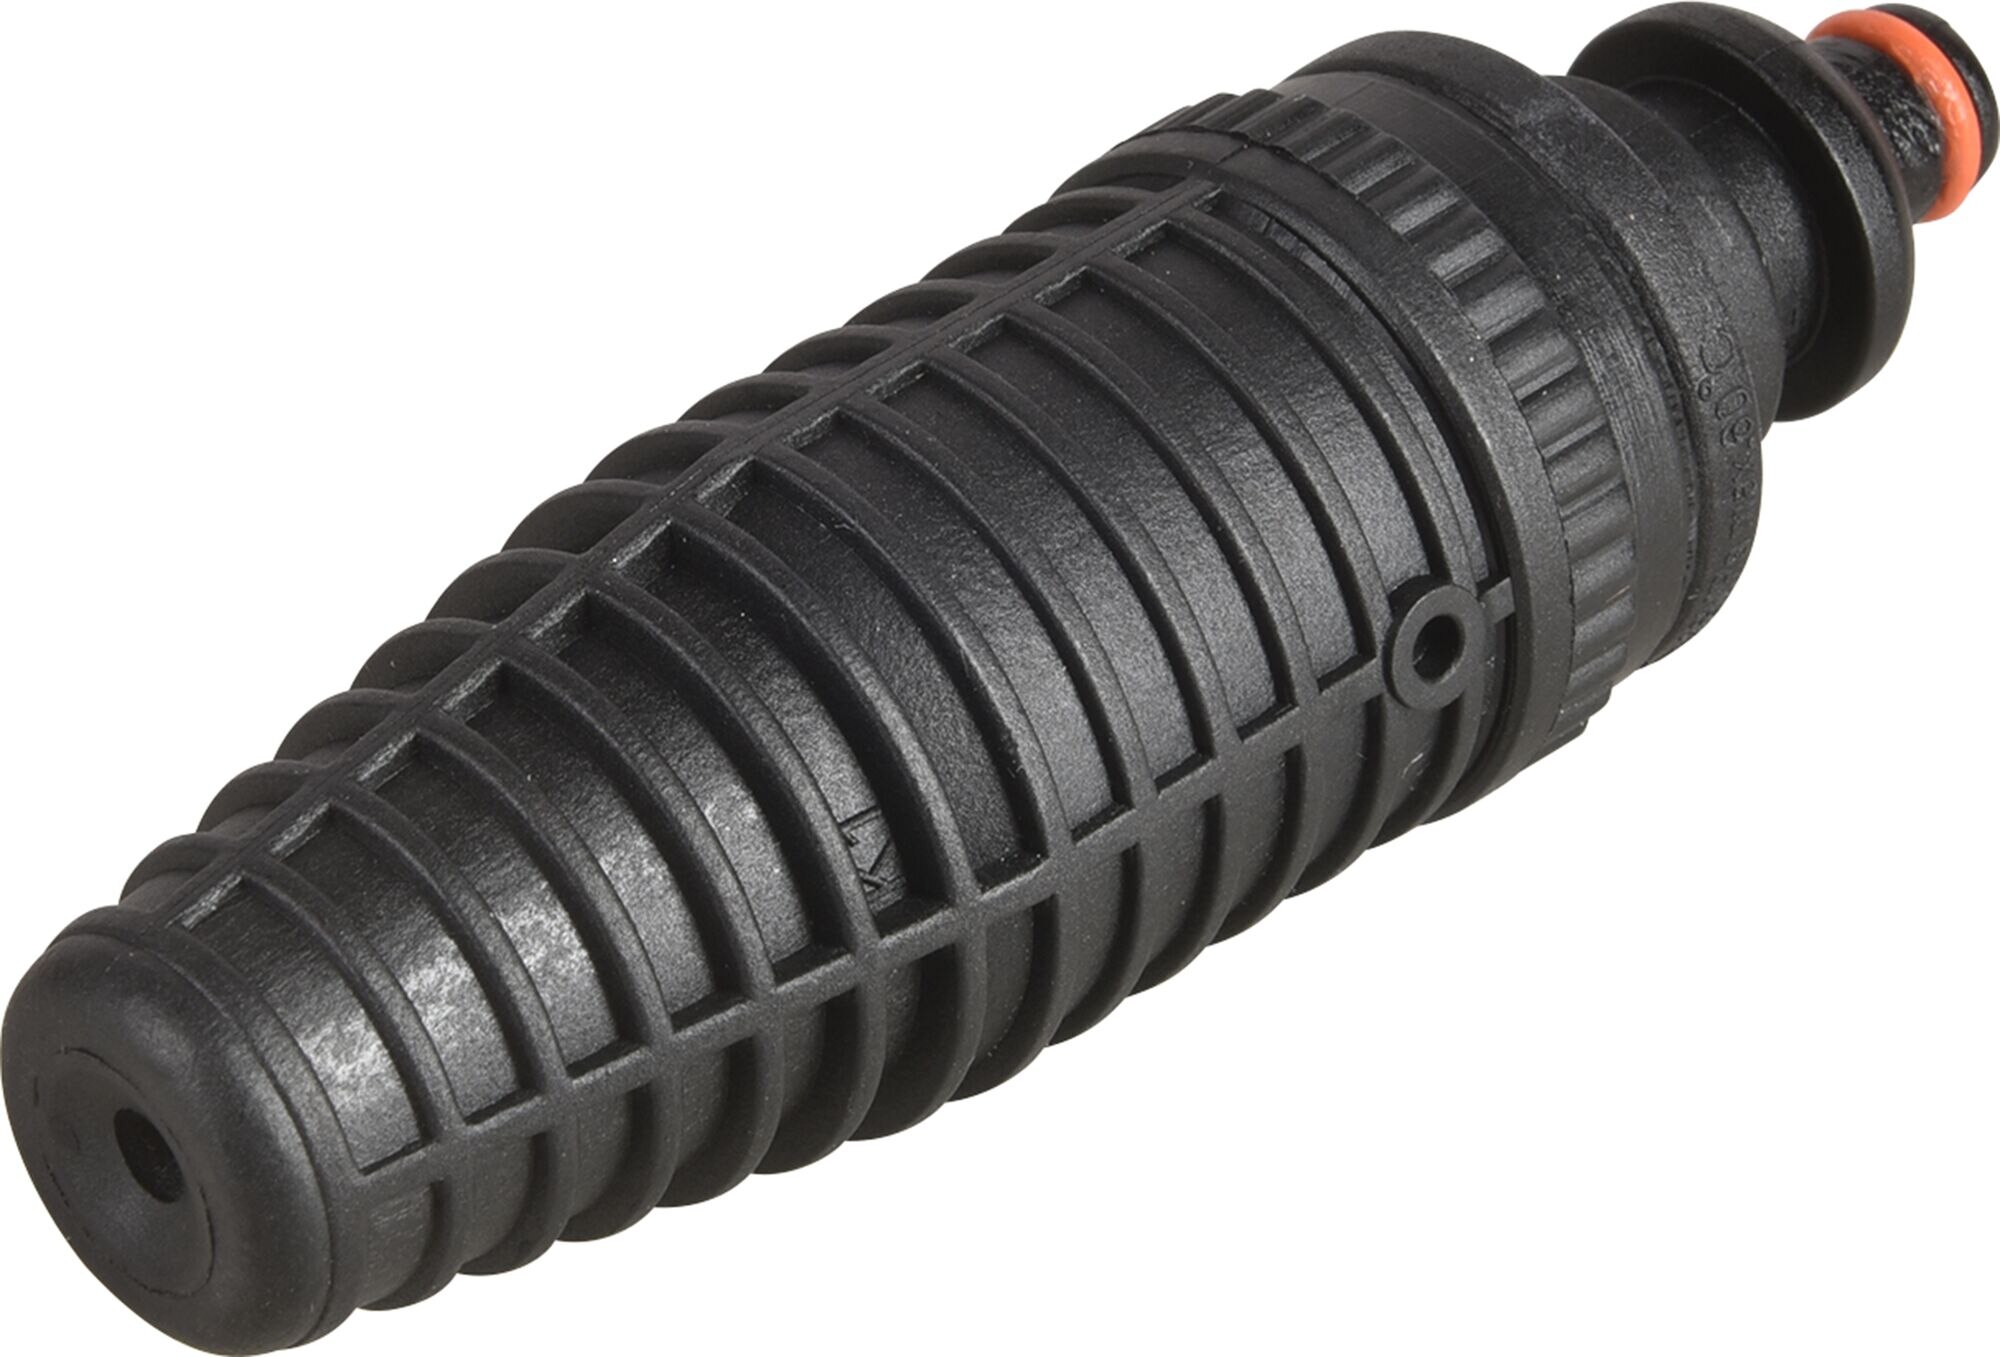 Turbo Nozzle for pressure washers up  2500psi 2865 